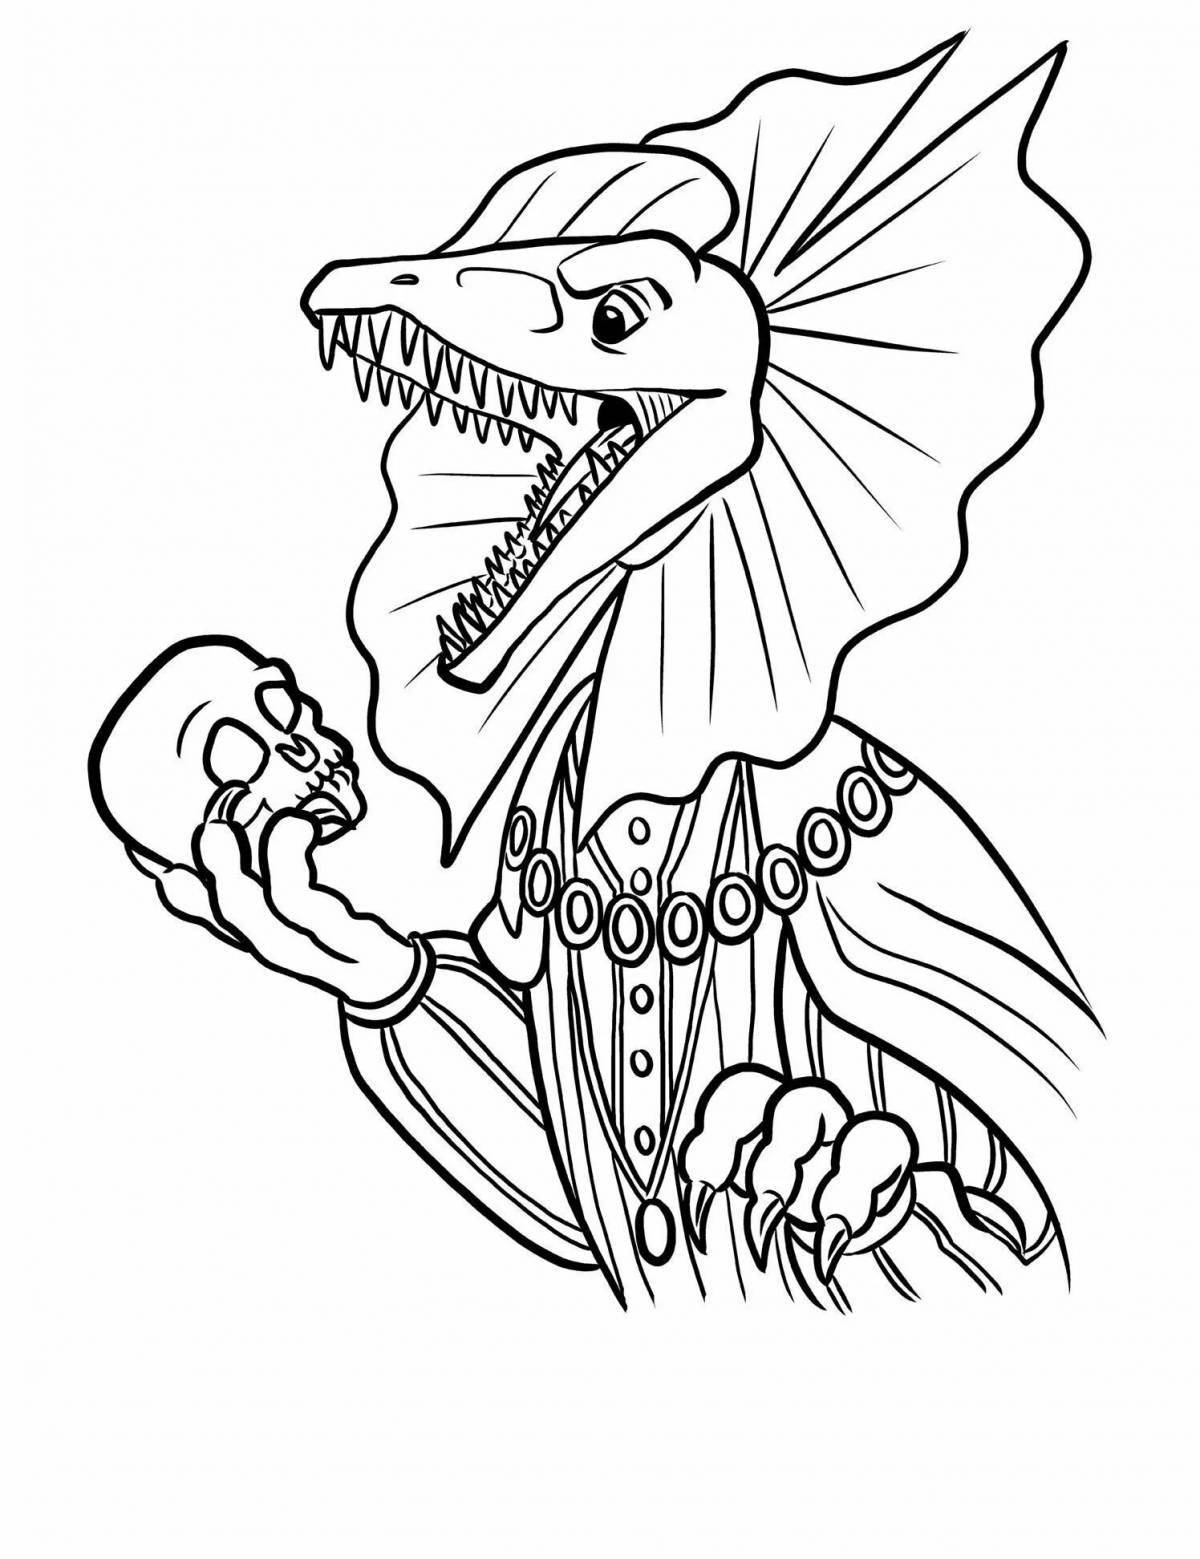 Animated dilophosaurus coloring page